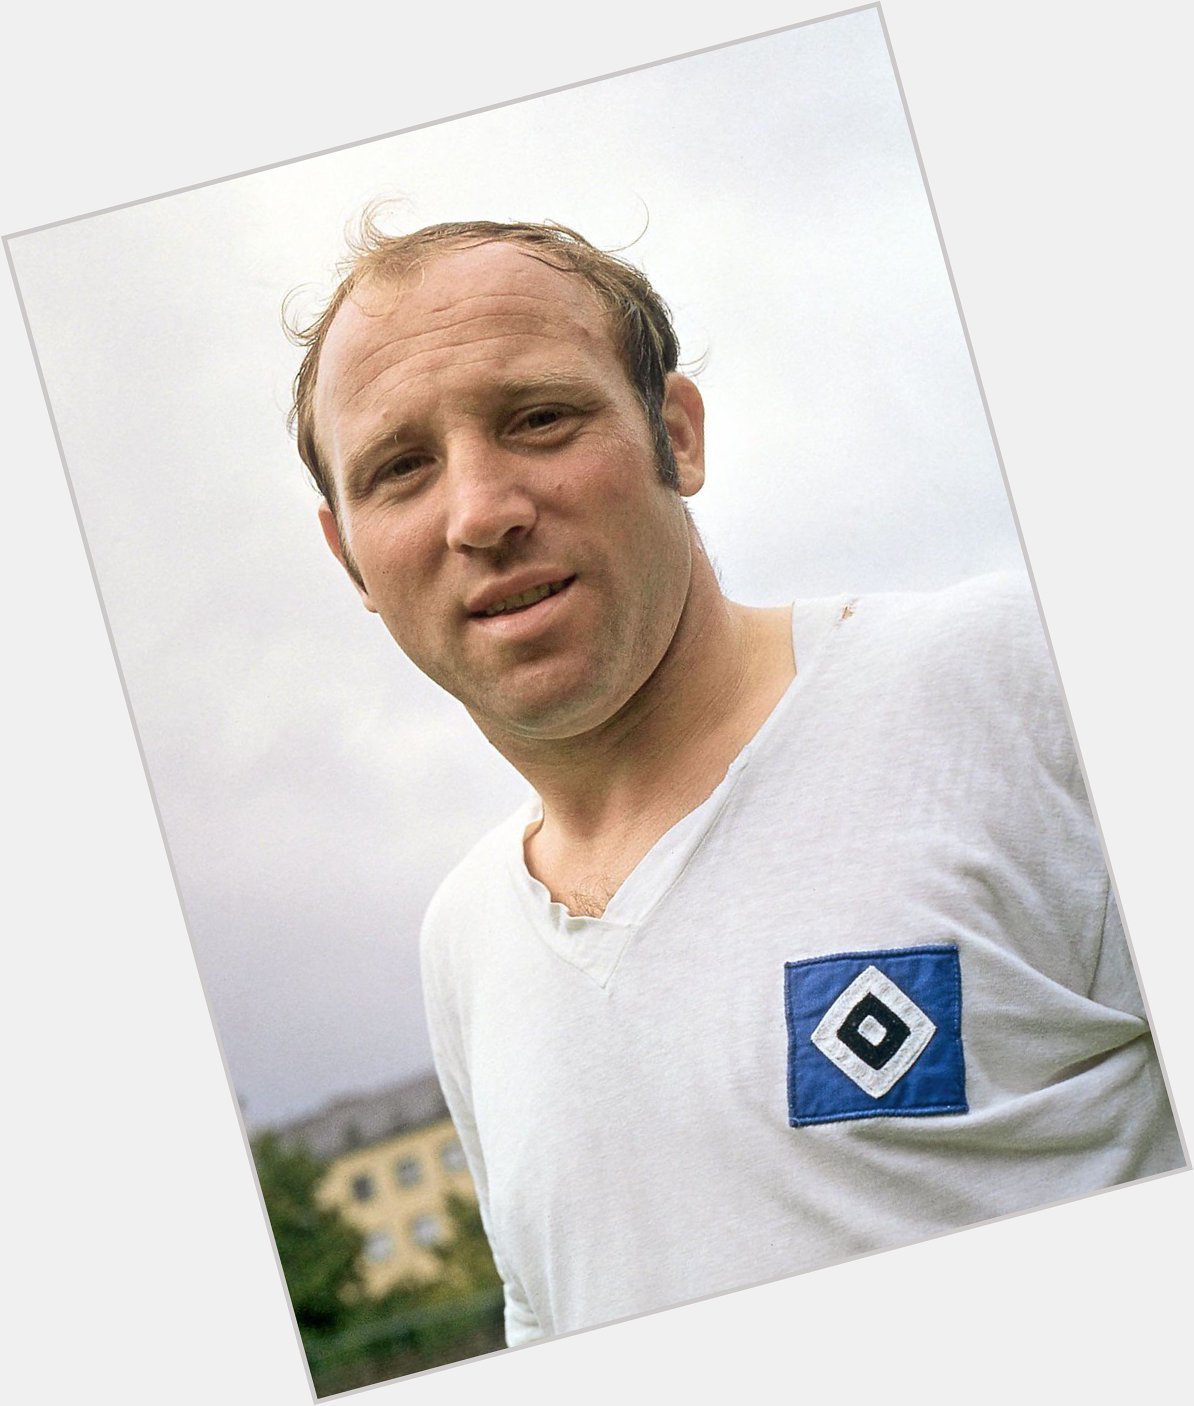 Happy Birthday, Uwe Seeler! greatest ever player is 79 years old today. 